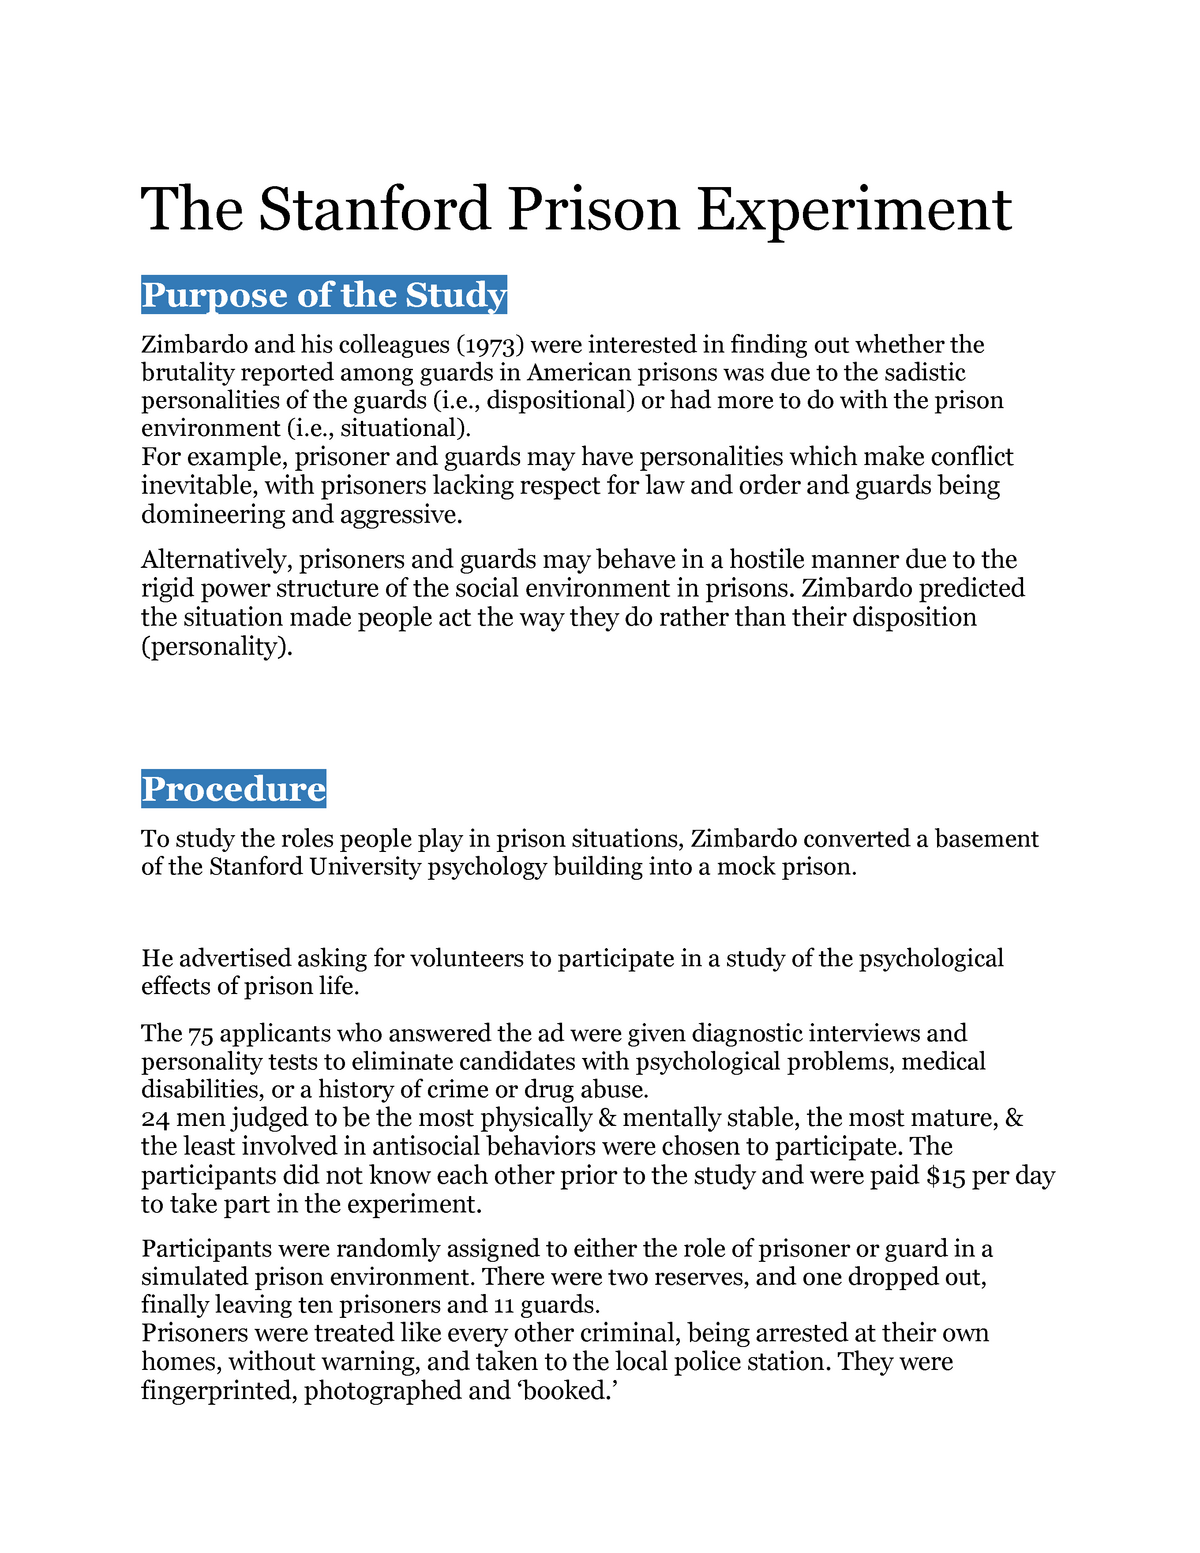 stanford prison experiment short summary